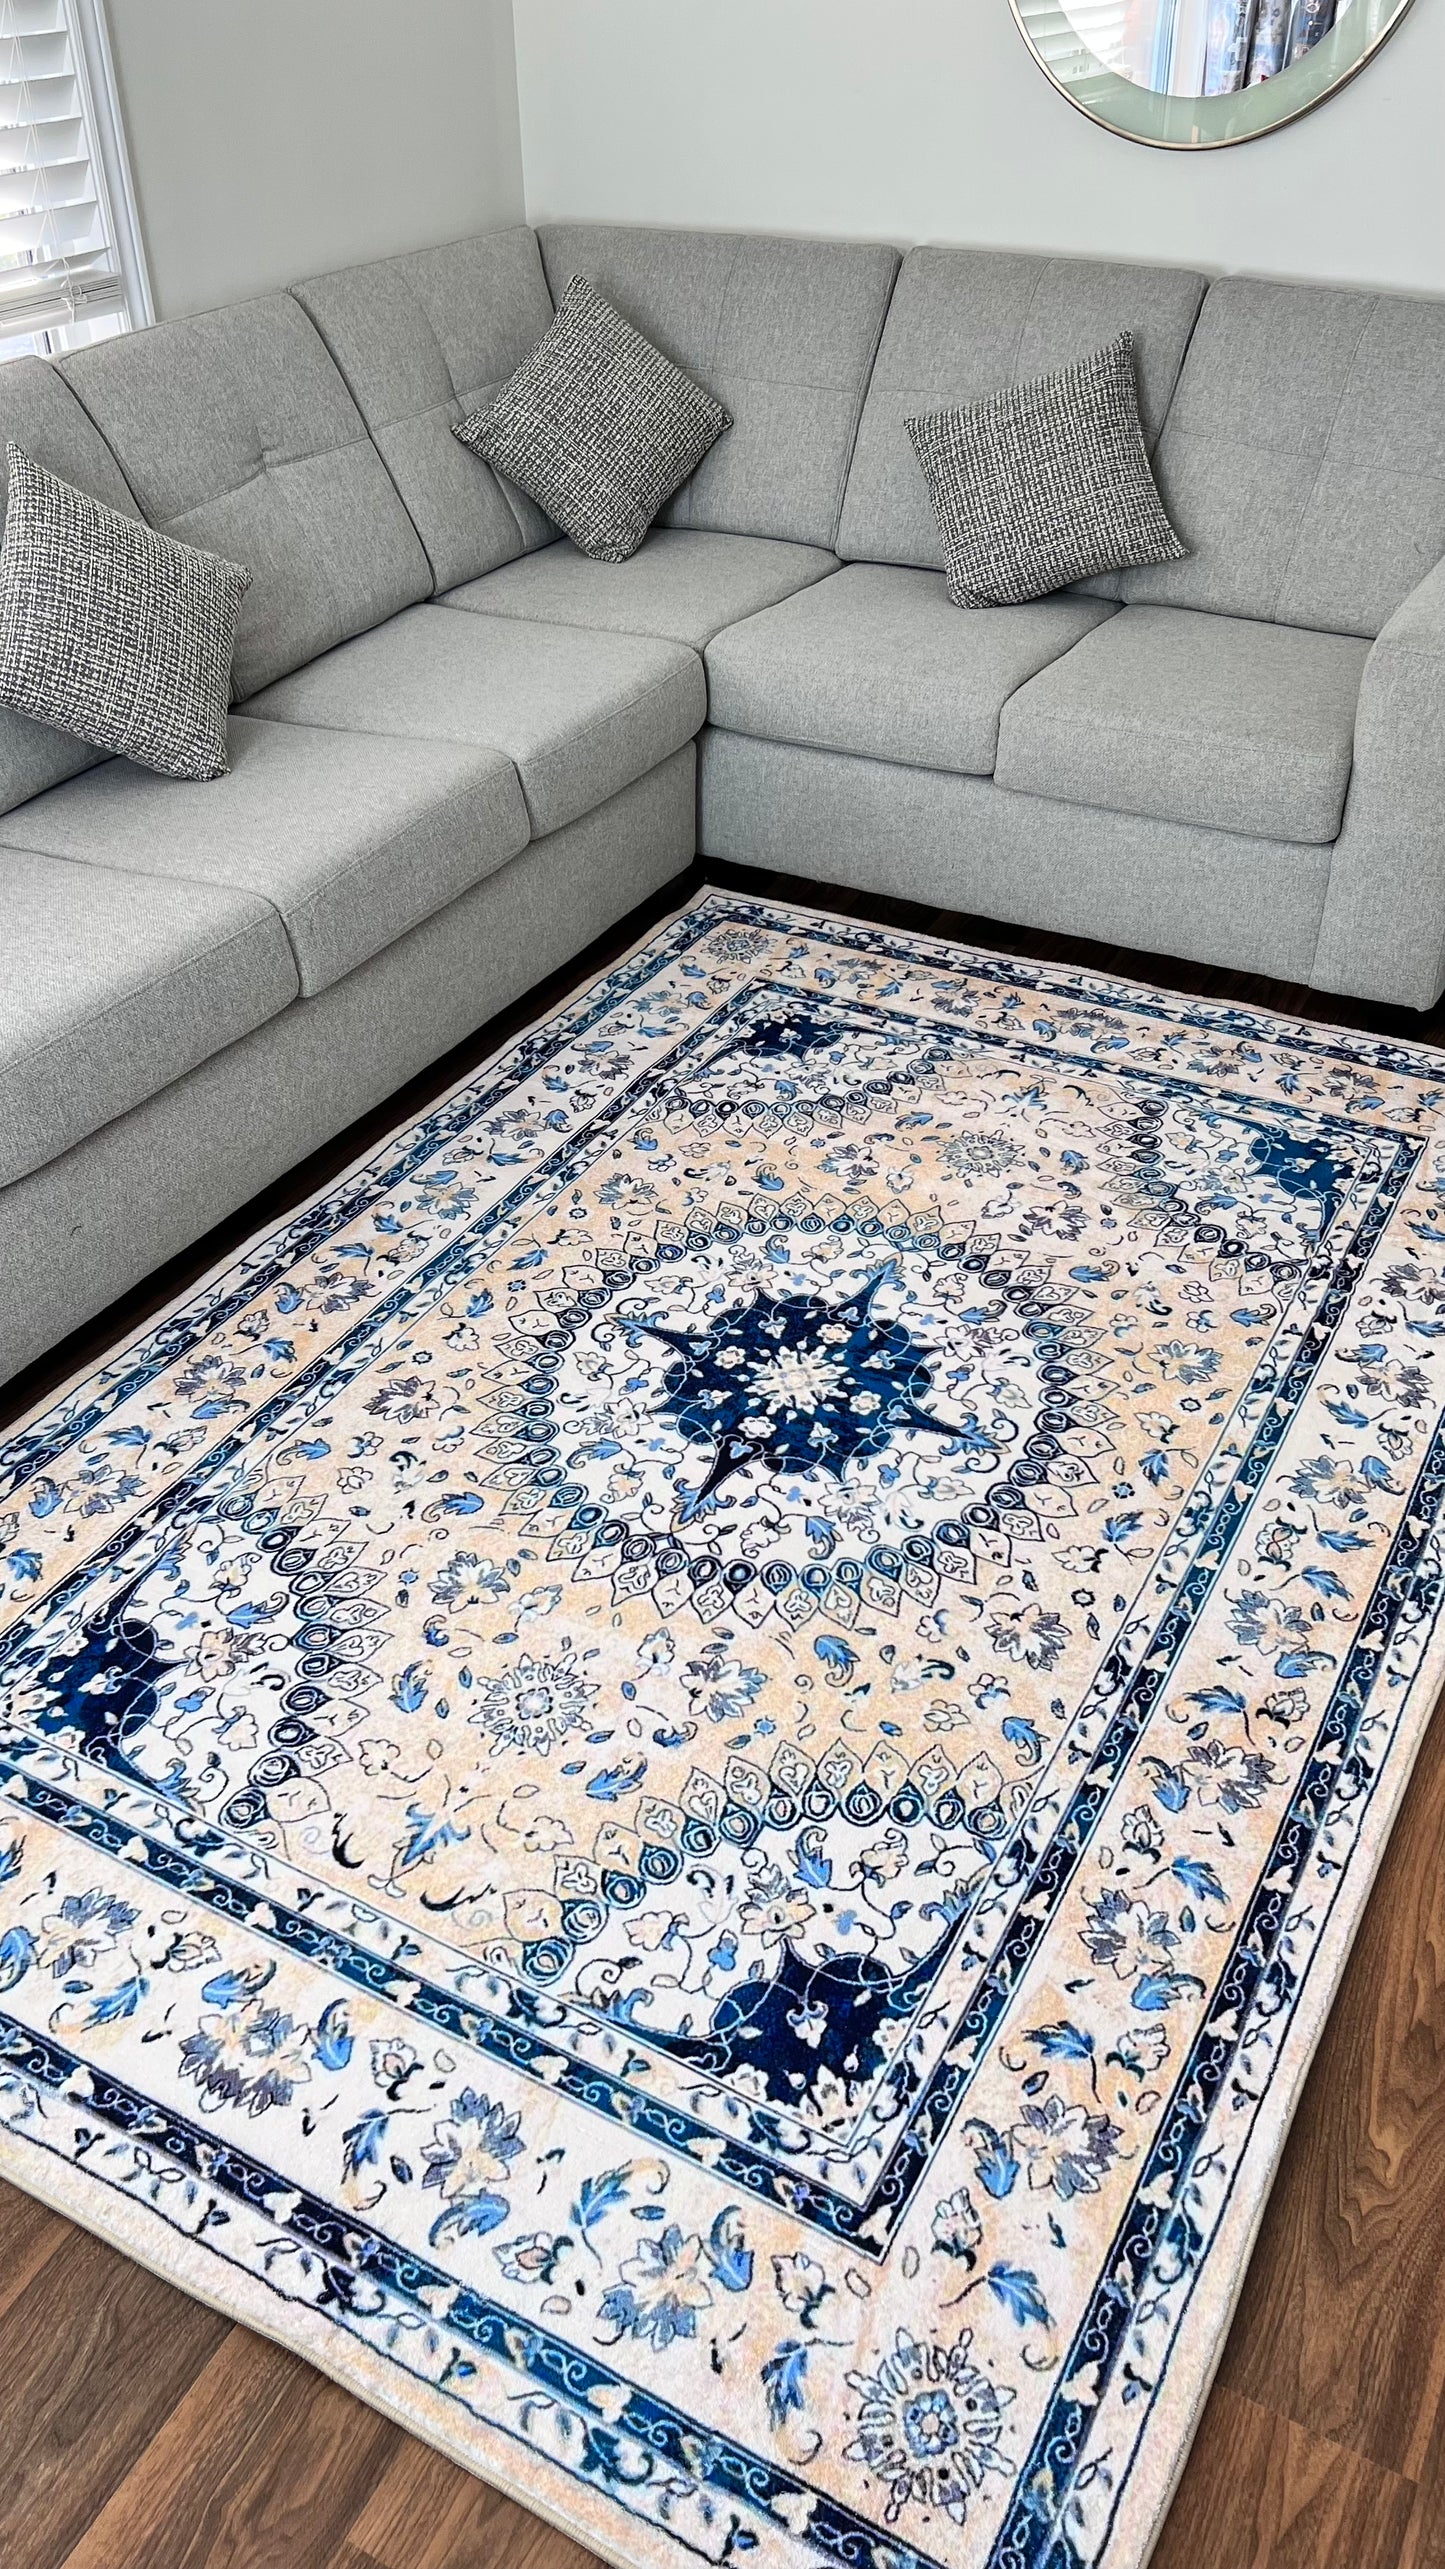 Innovative Traditions: Persian Rugs for Today's Living